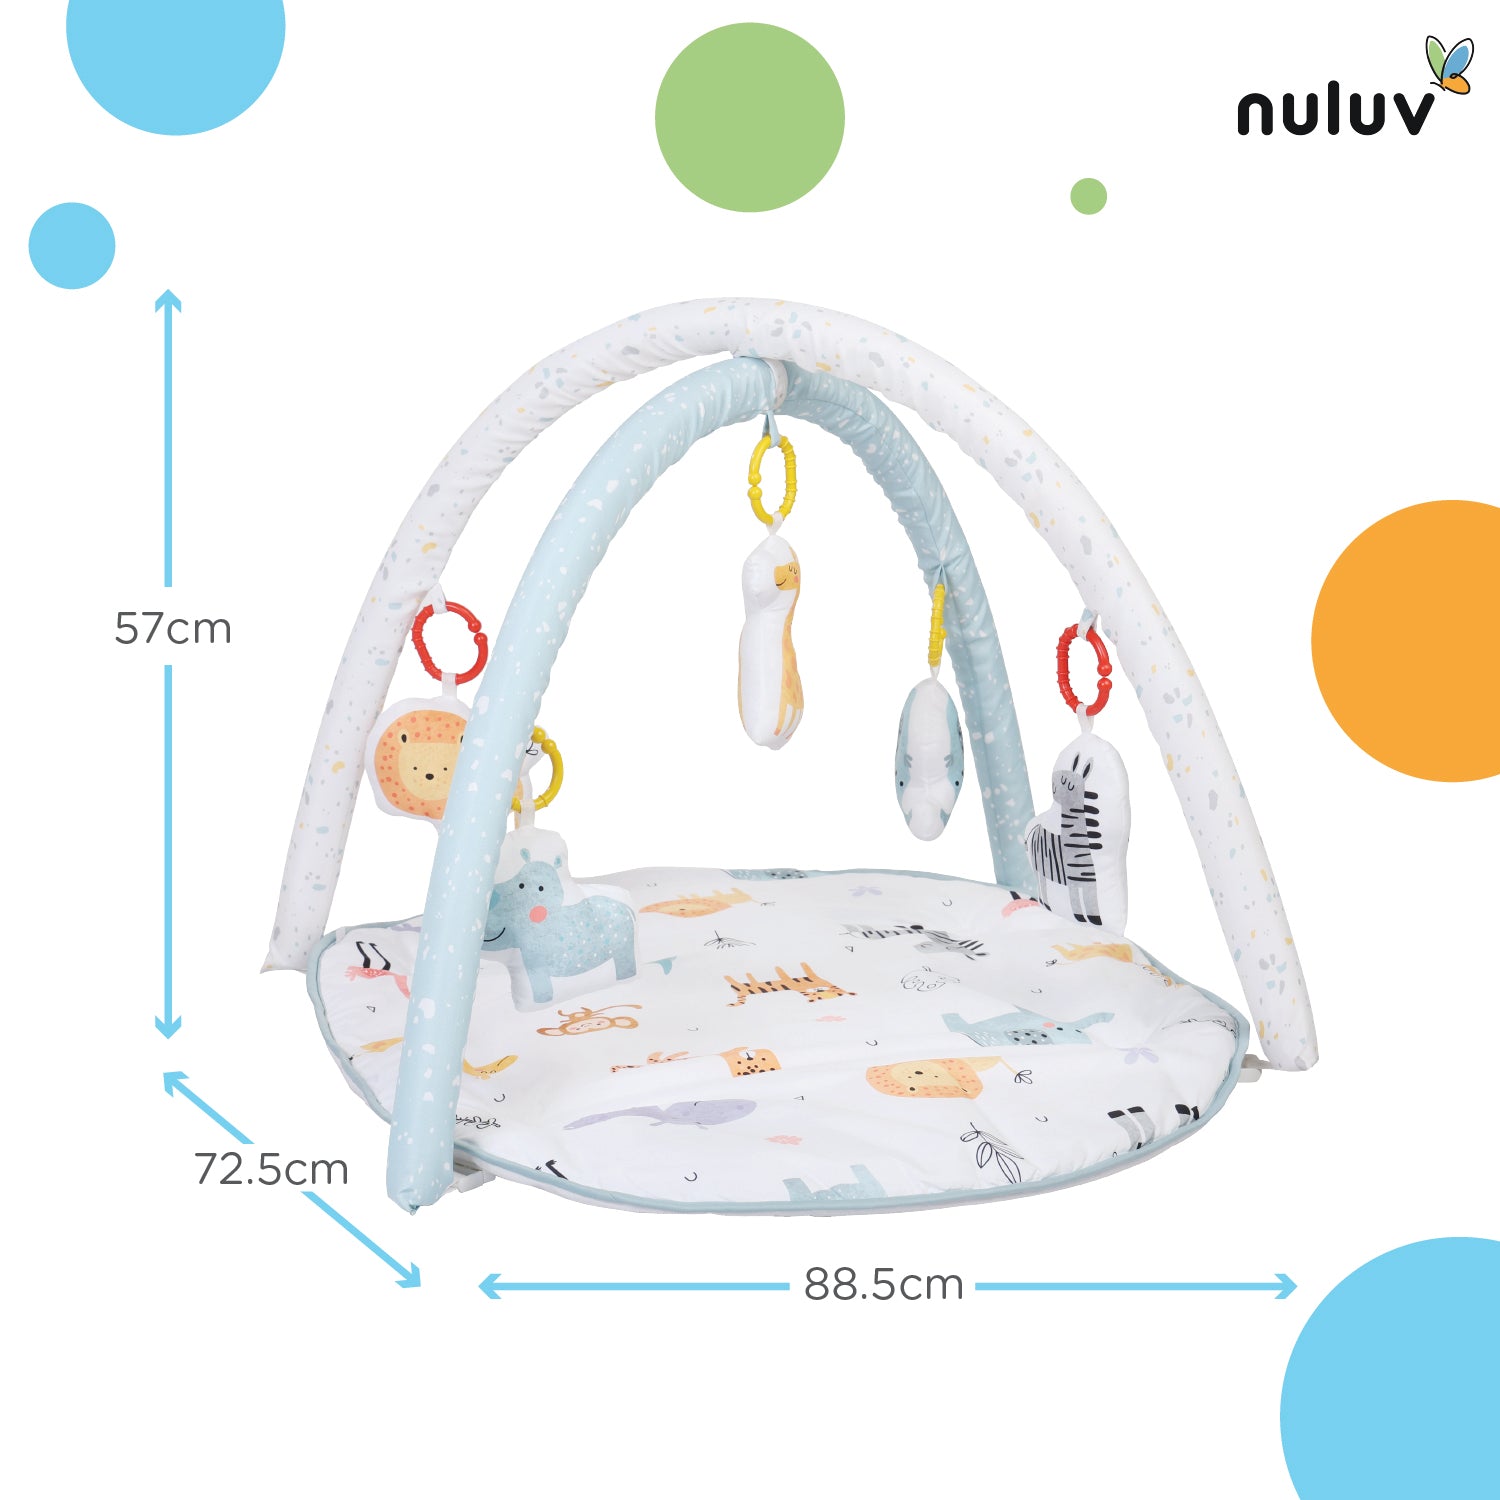 Nuluv Baby Playgym for Babies | Activity Play Gym Mat With 5 Hanging Toys (Jungle)